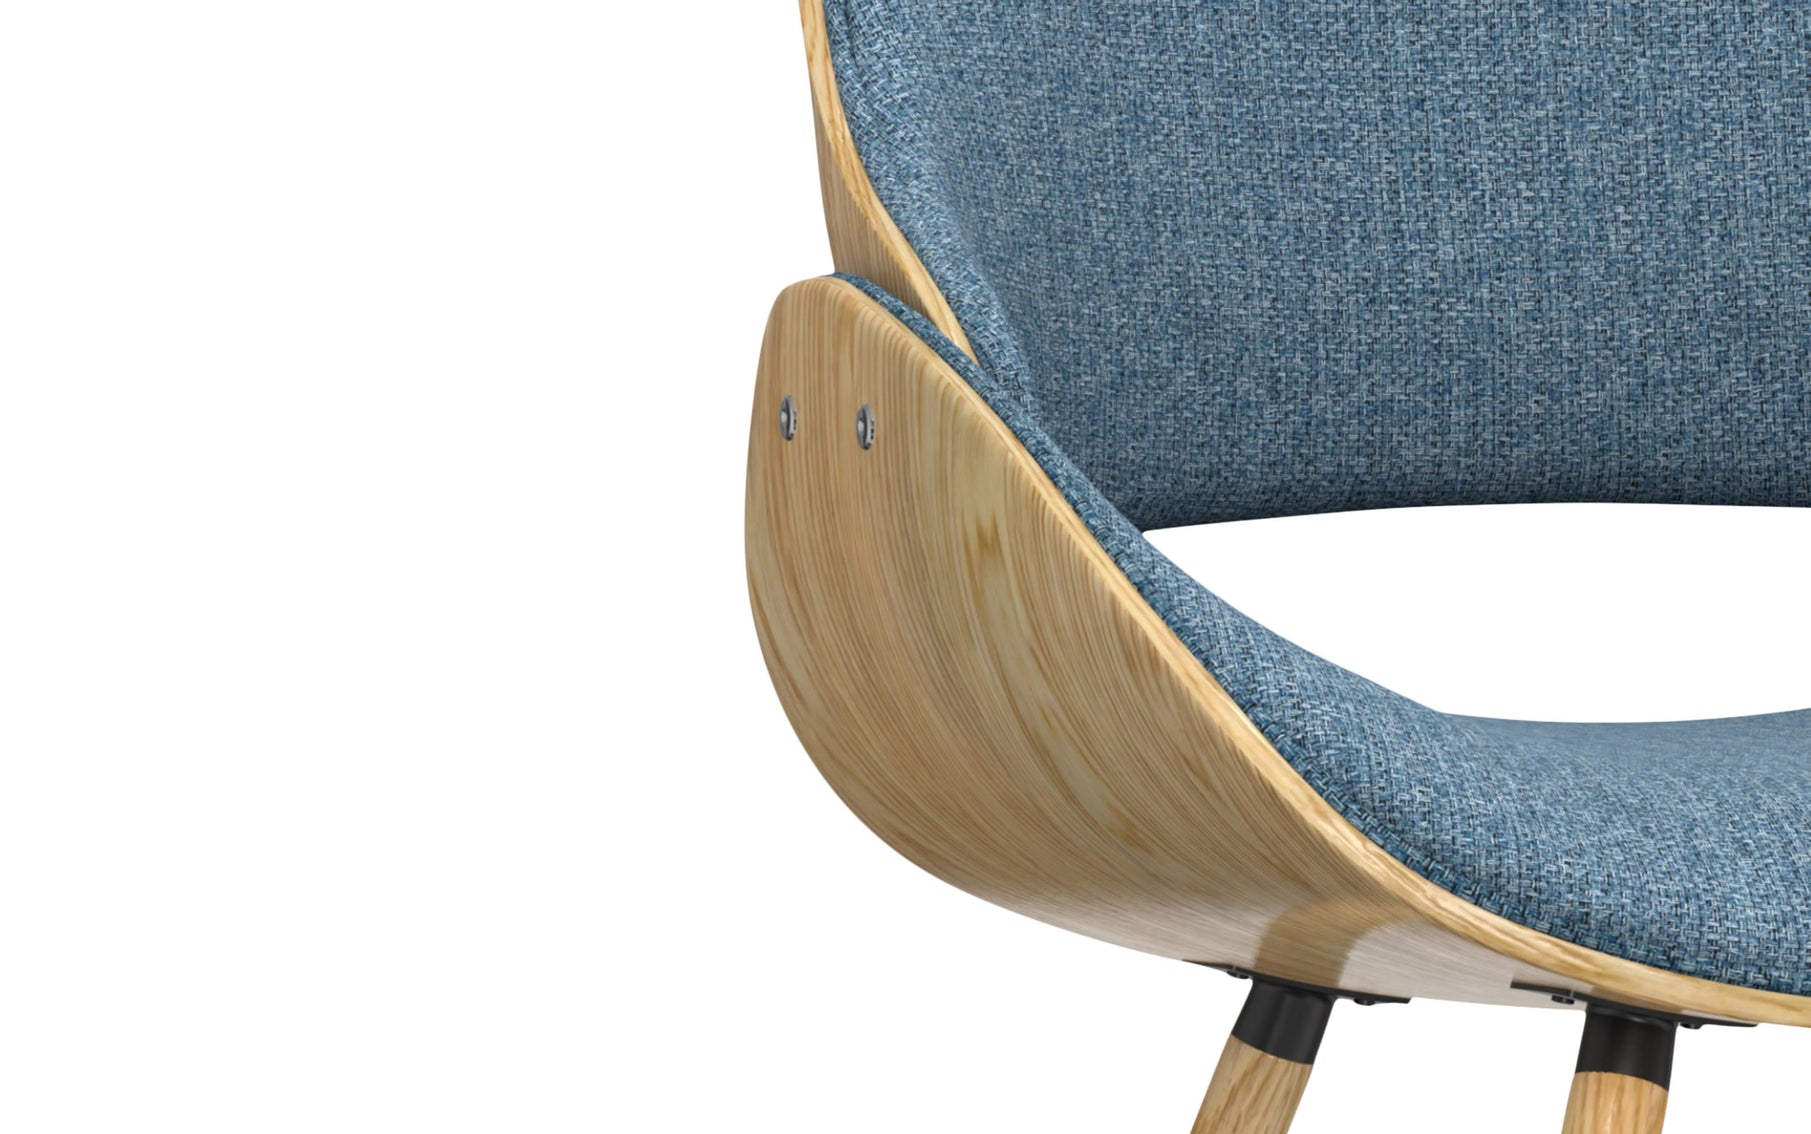 Denim Blue Light Wood Linen Style Fabric | Malden Bentwood Dining Chair with Wood Back